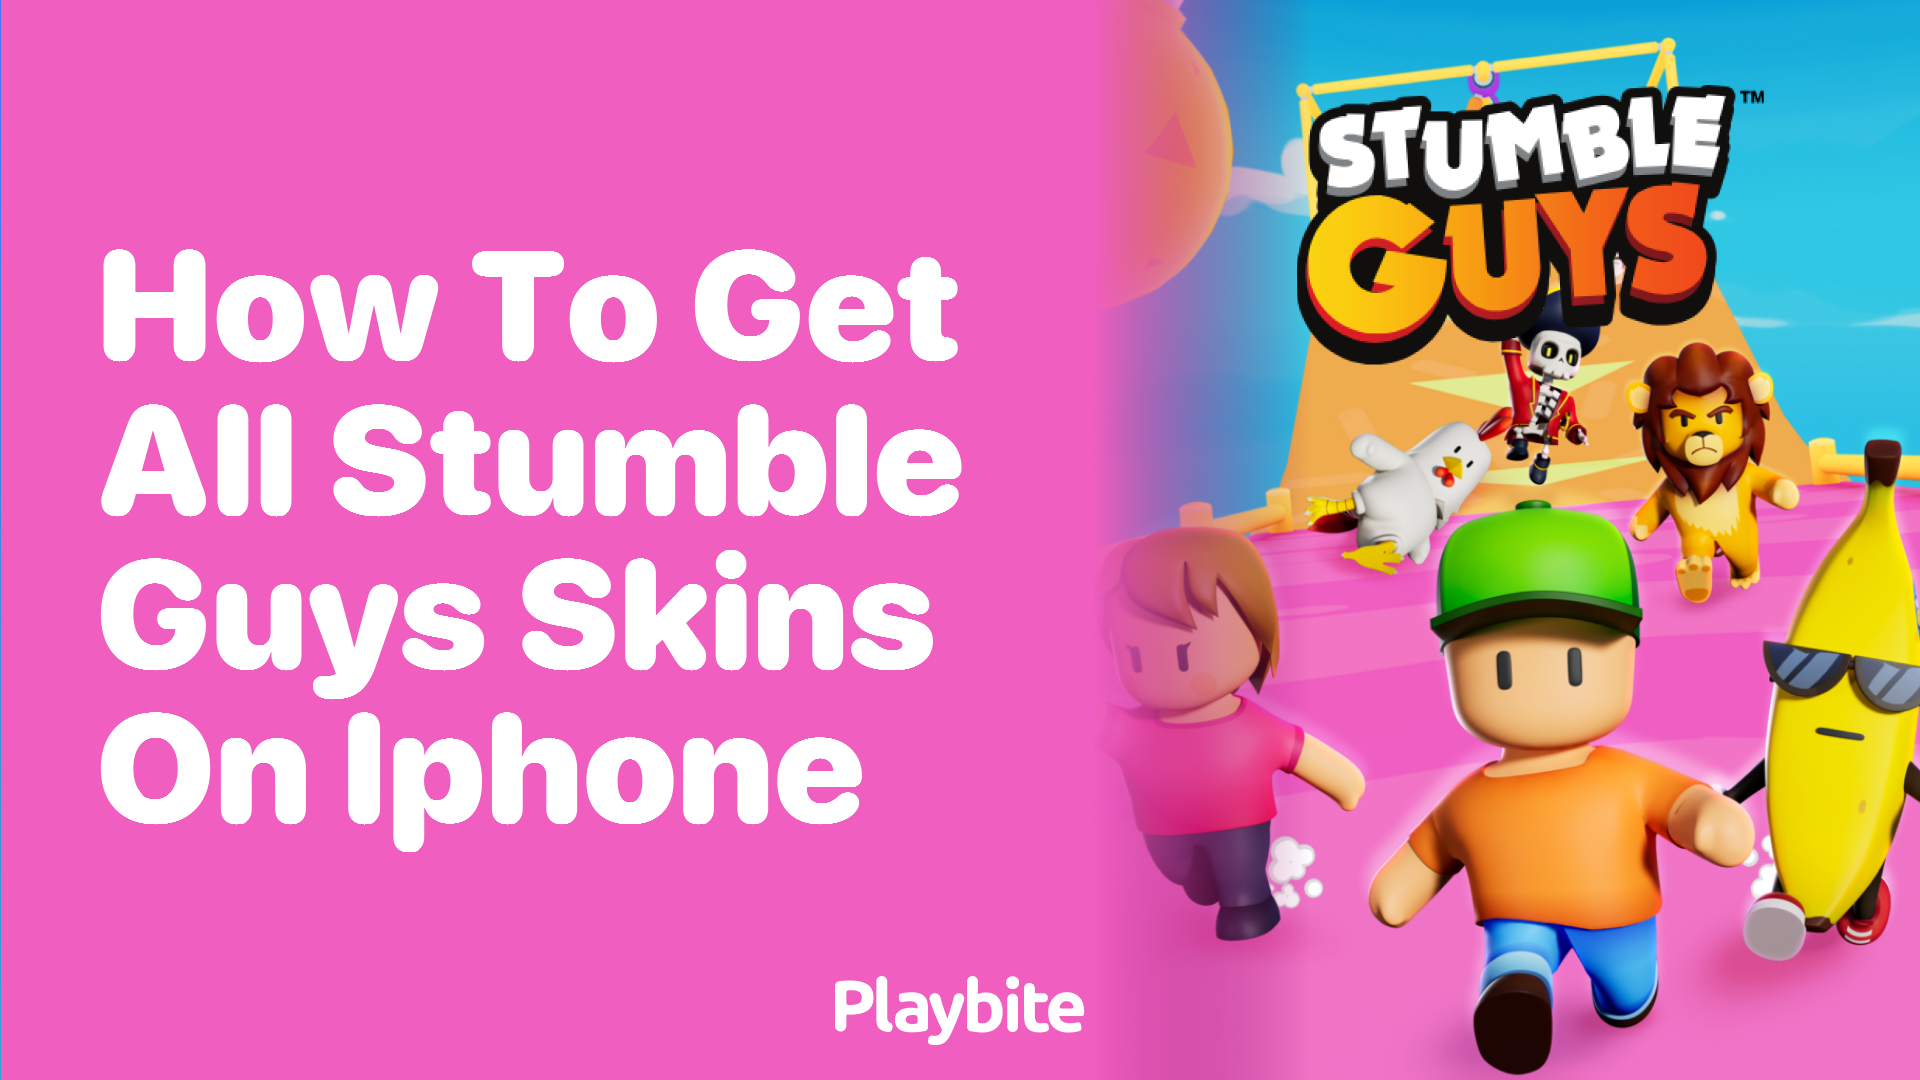 How to Get All Stumble Guys Skins on iPhone: A Fun Guide!